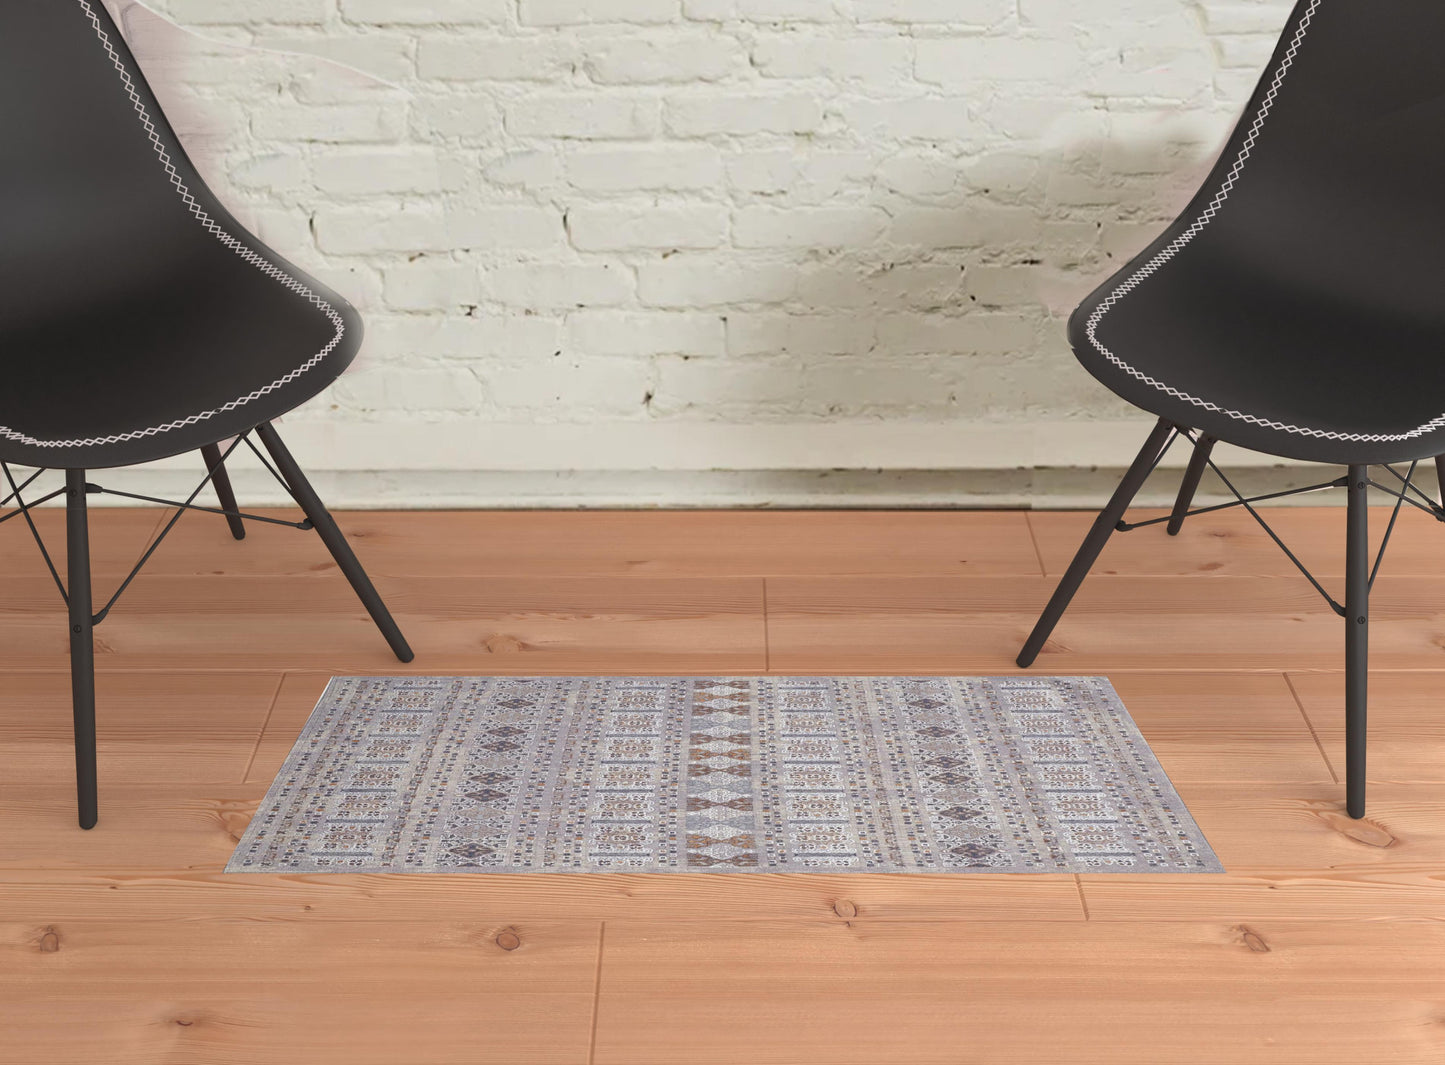 8' X 10' Orange Gray And White Geometric Power Loom Distressed Stain Resistant Area Rug